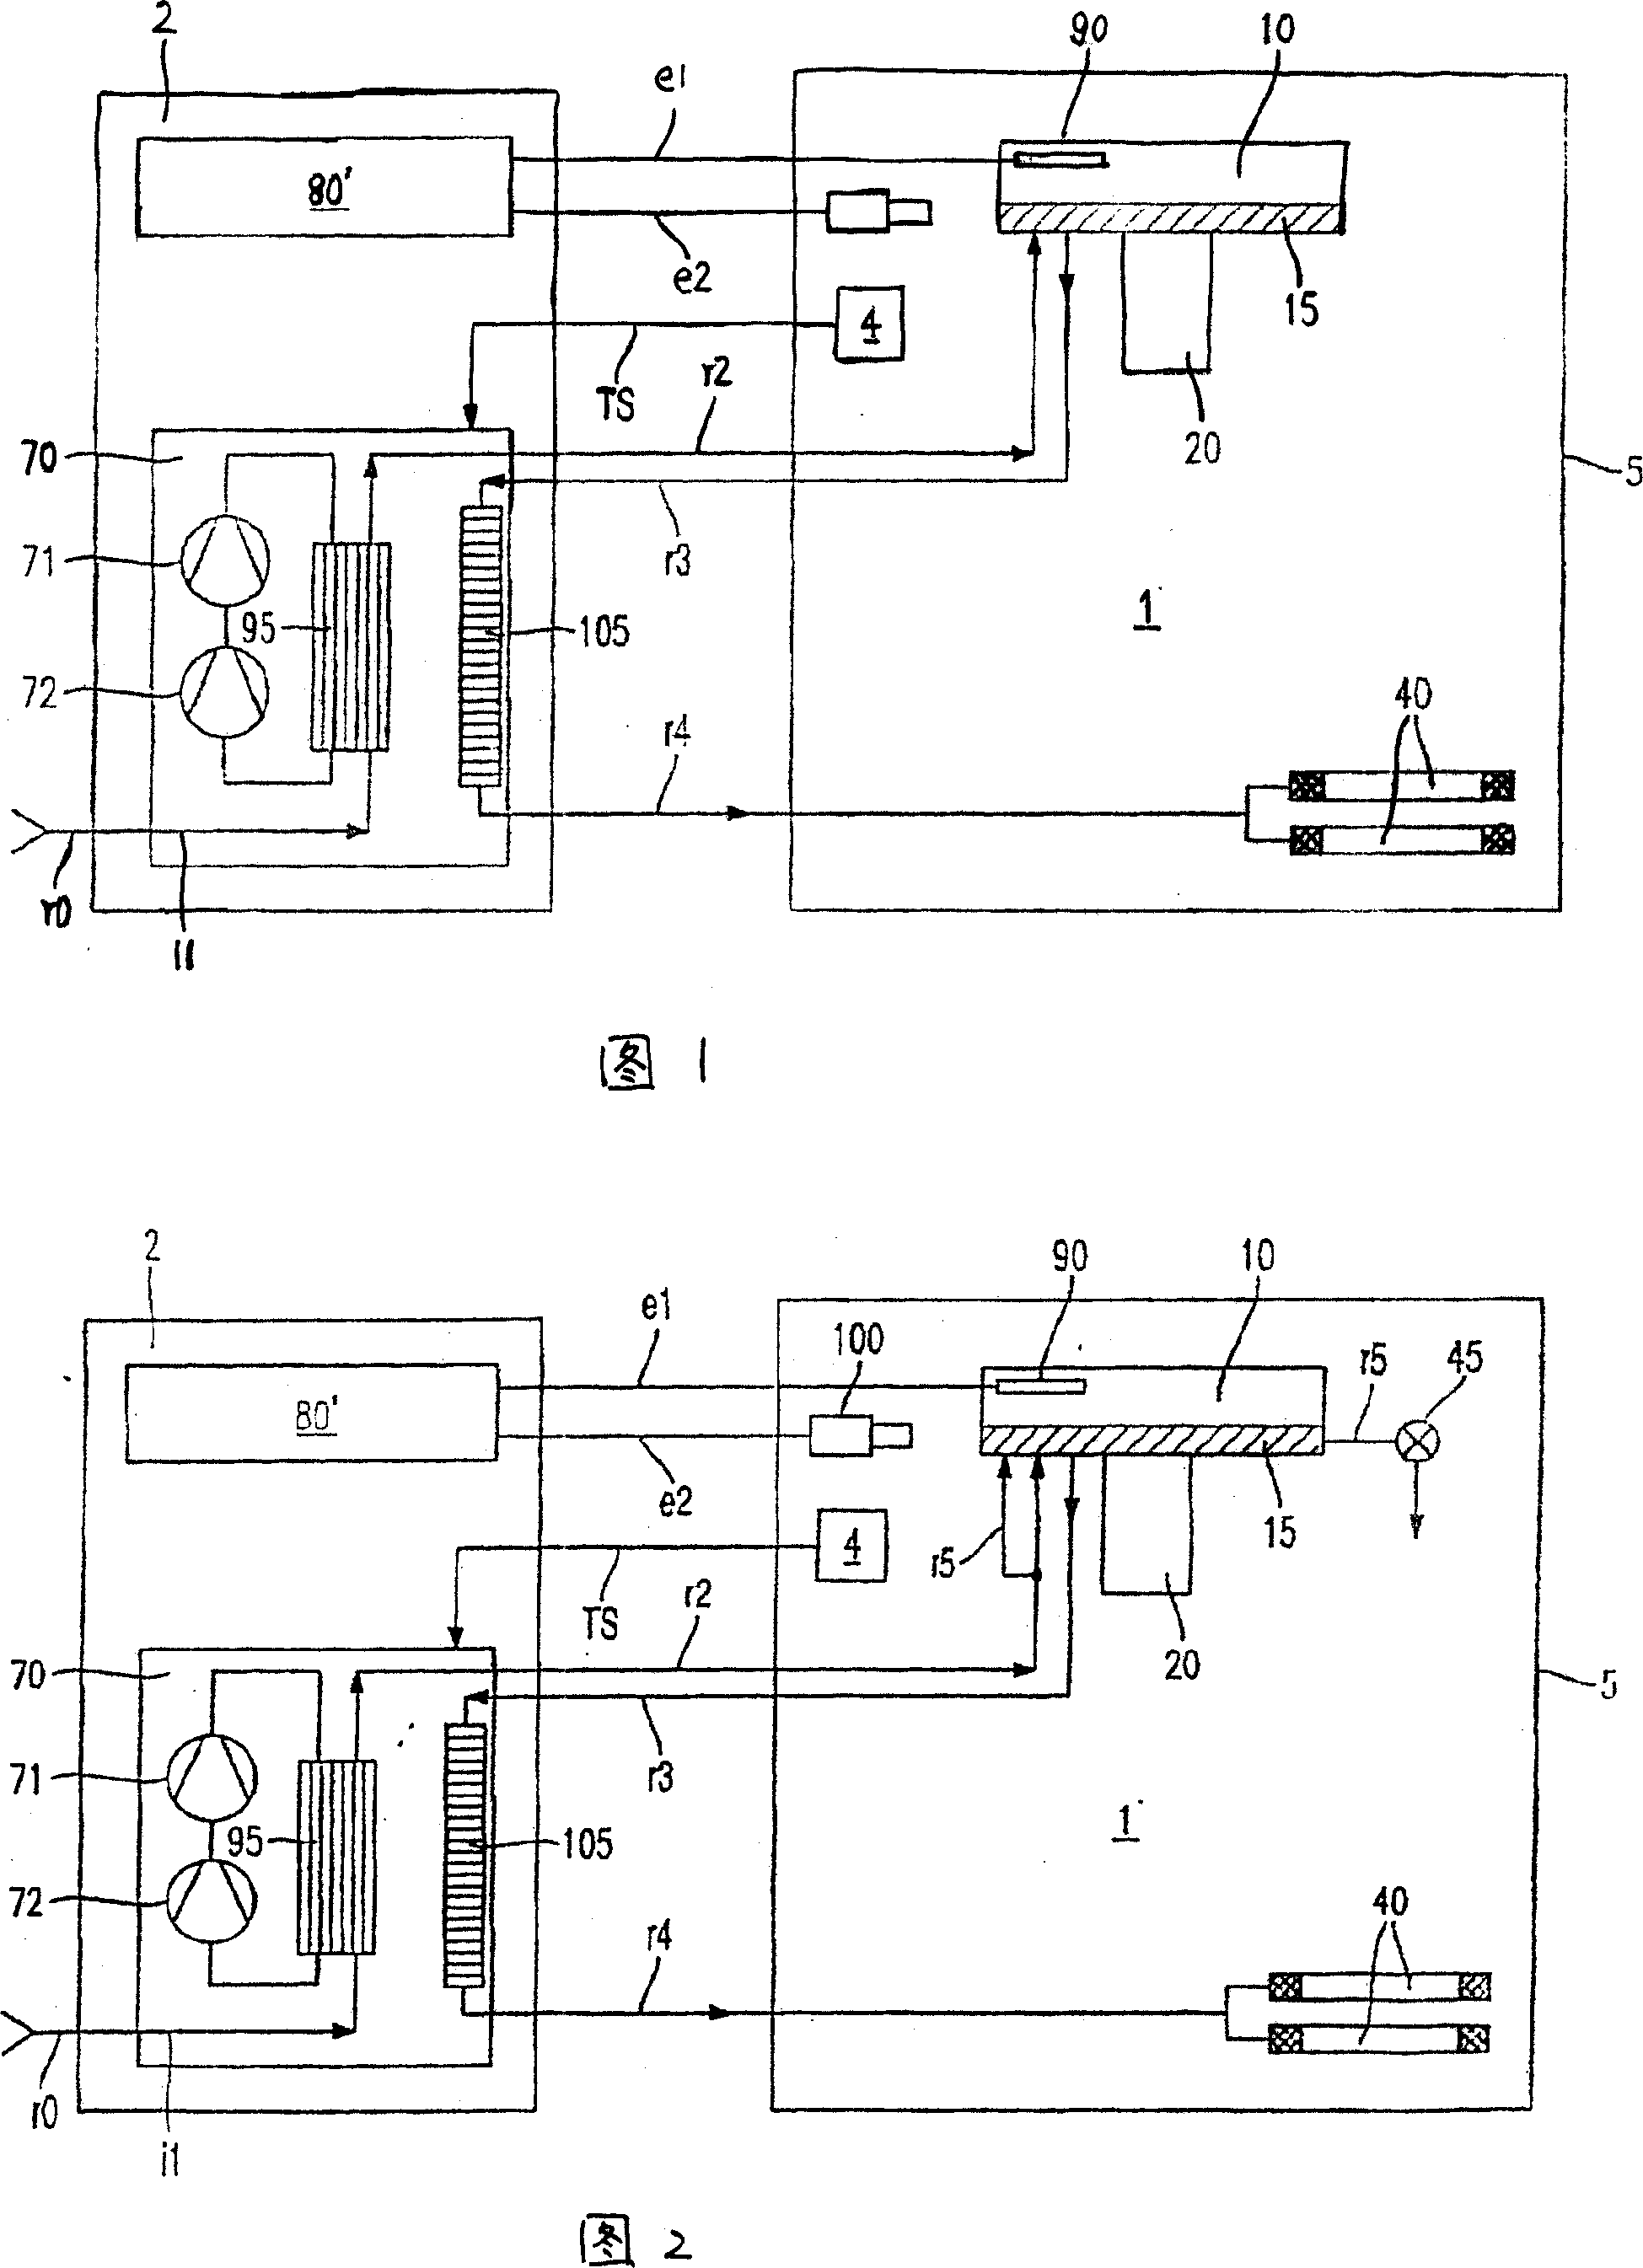 Method and device for conditioning semiconductor wafers and/or hybrids